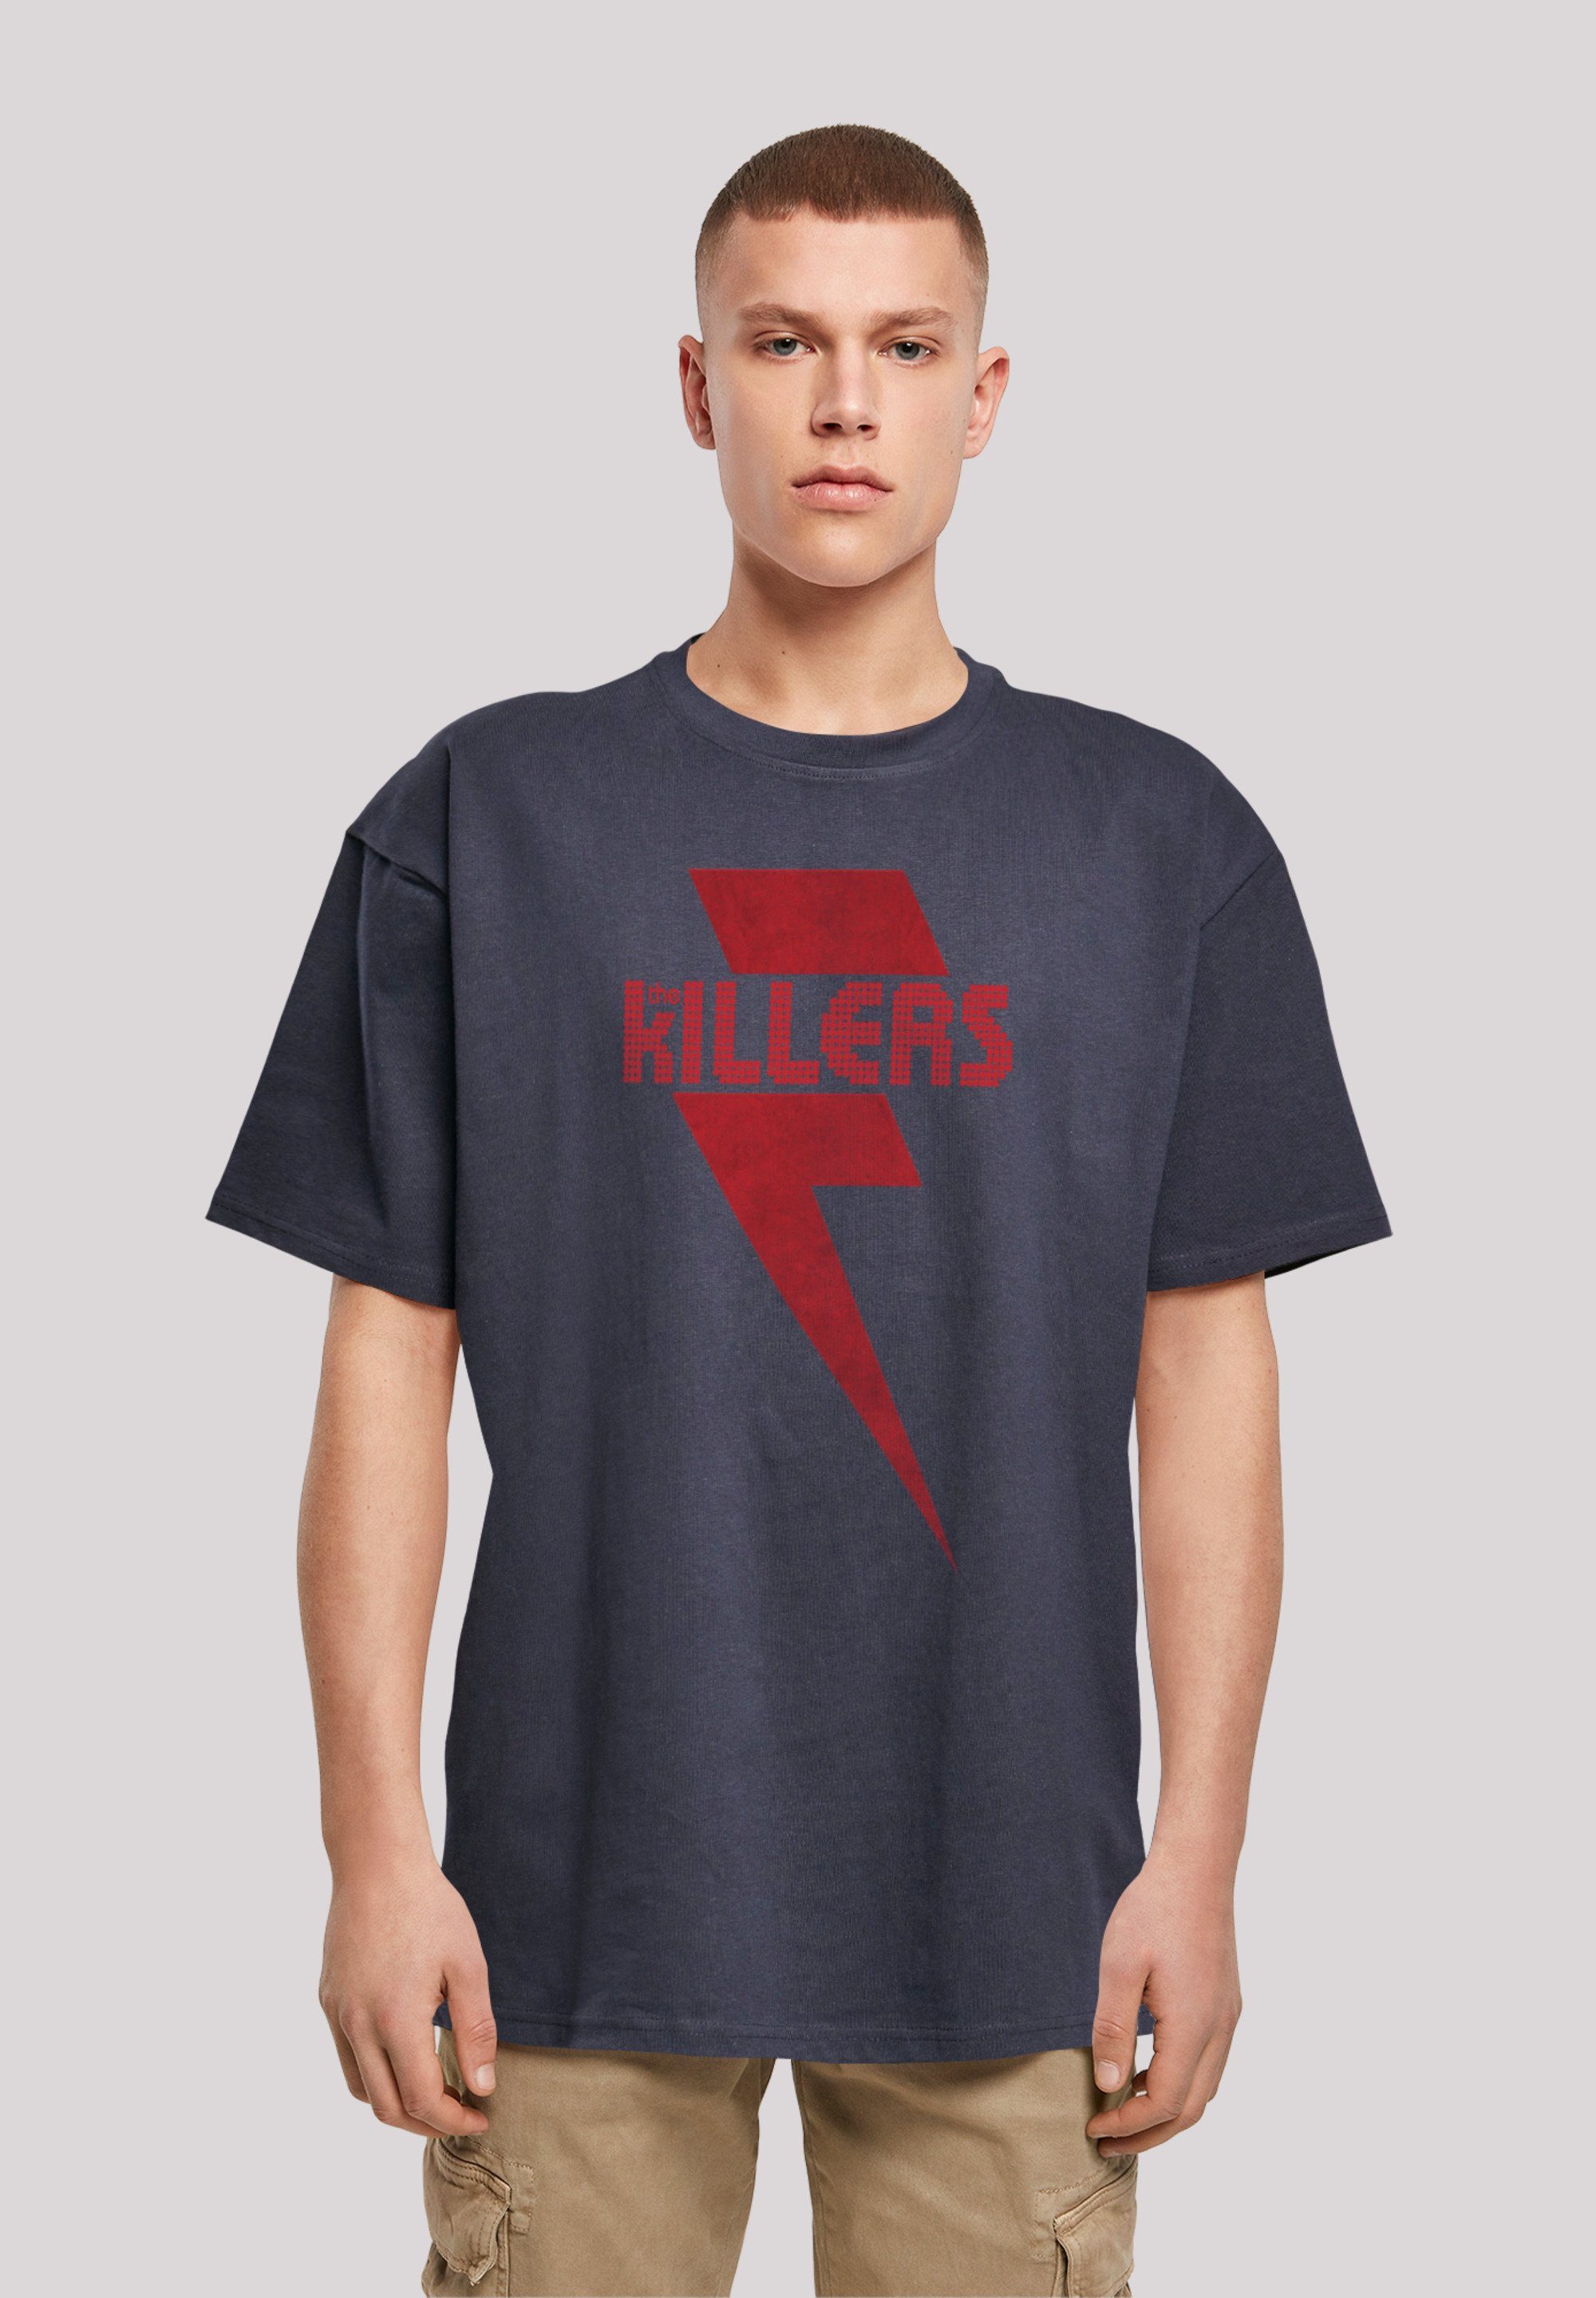 Killers F4NT4STIC T-Shirt navy Red Bolt The Print Rock Band